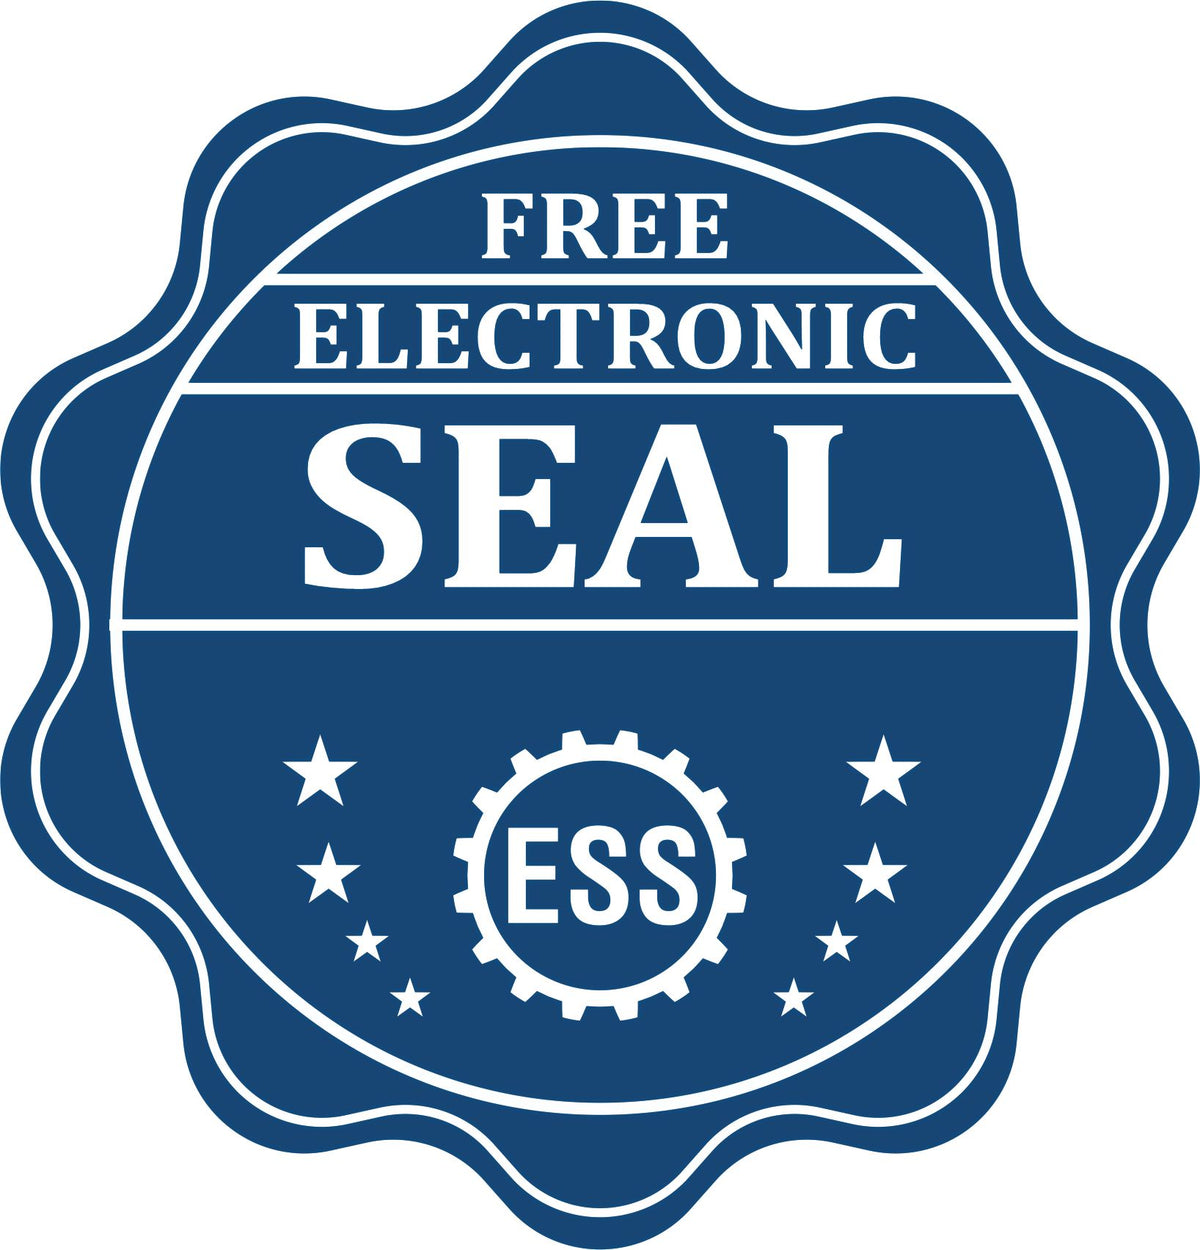 A badge showing a free electronic seal for the Slim Pre-Inked Wyoming Professional Engineer Seal Stamp with stars and the ESS gear on the emblem.